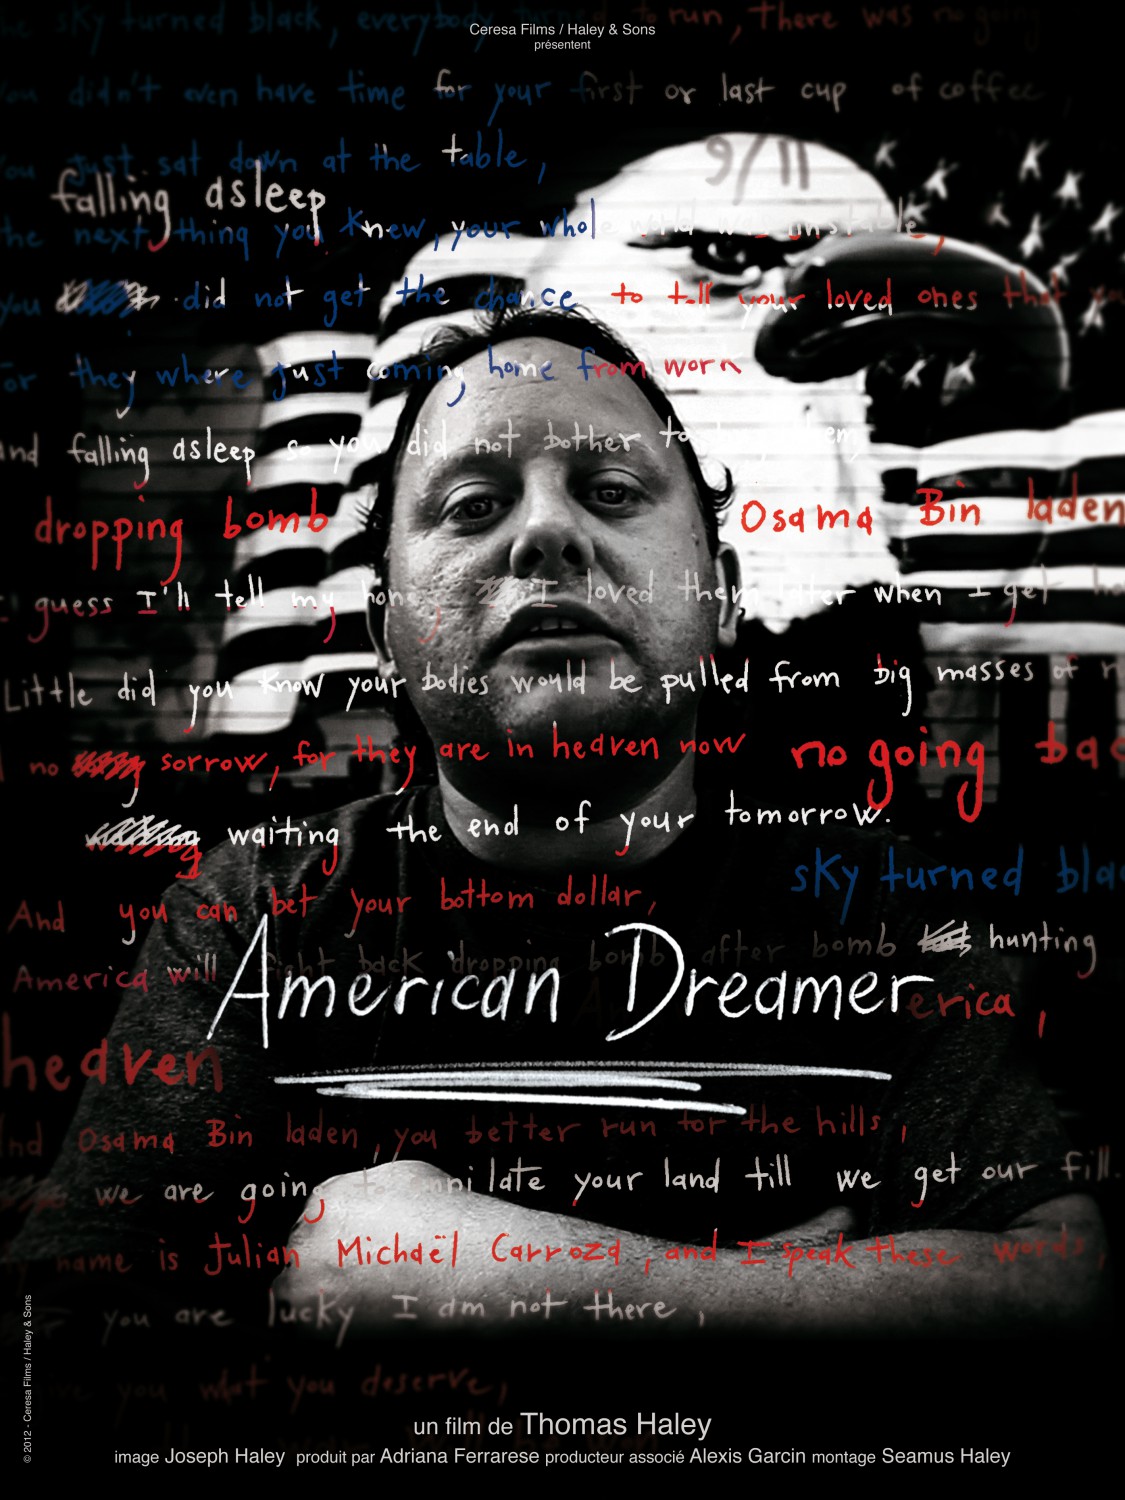 Extra Large Movie Poster Image for American Dreamer